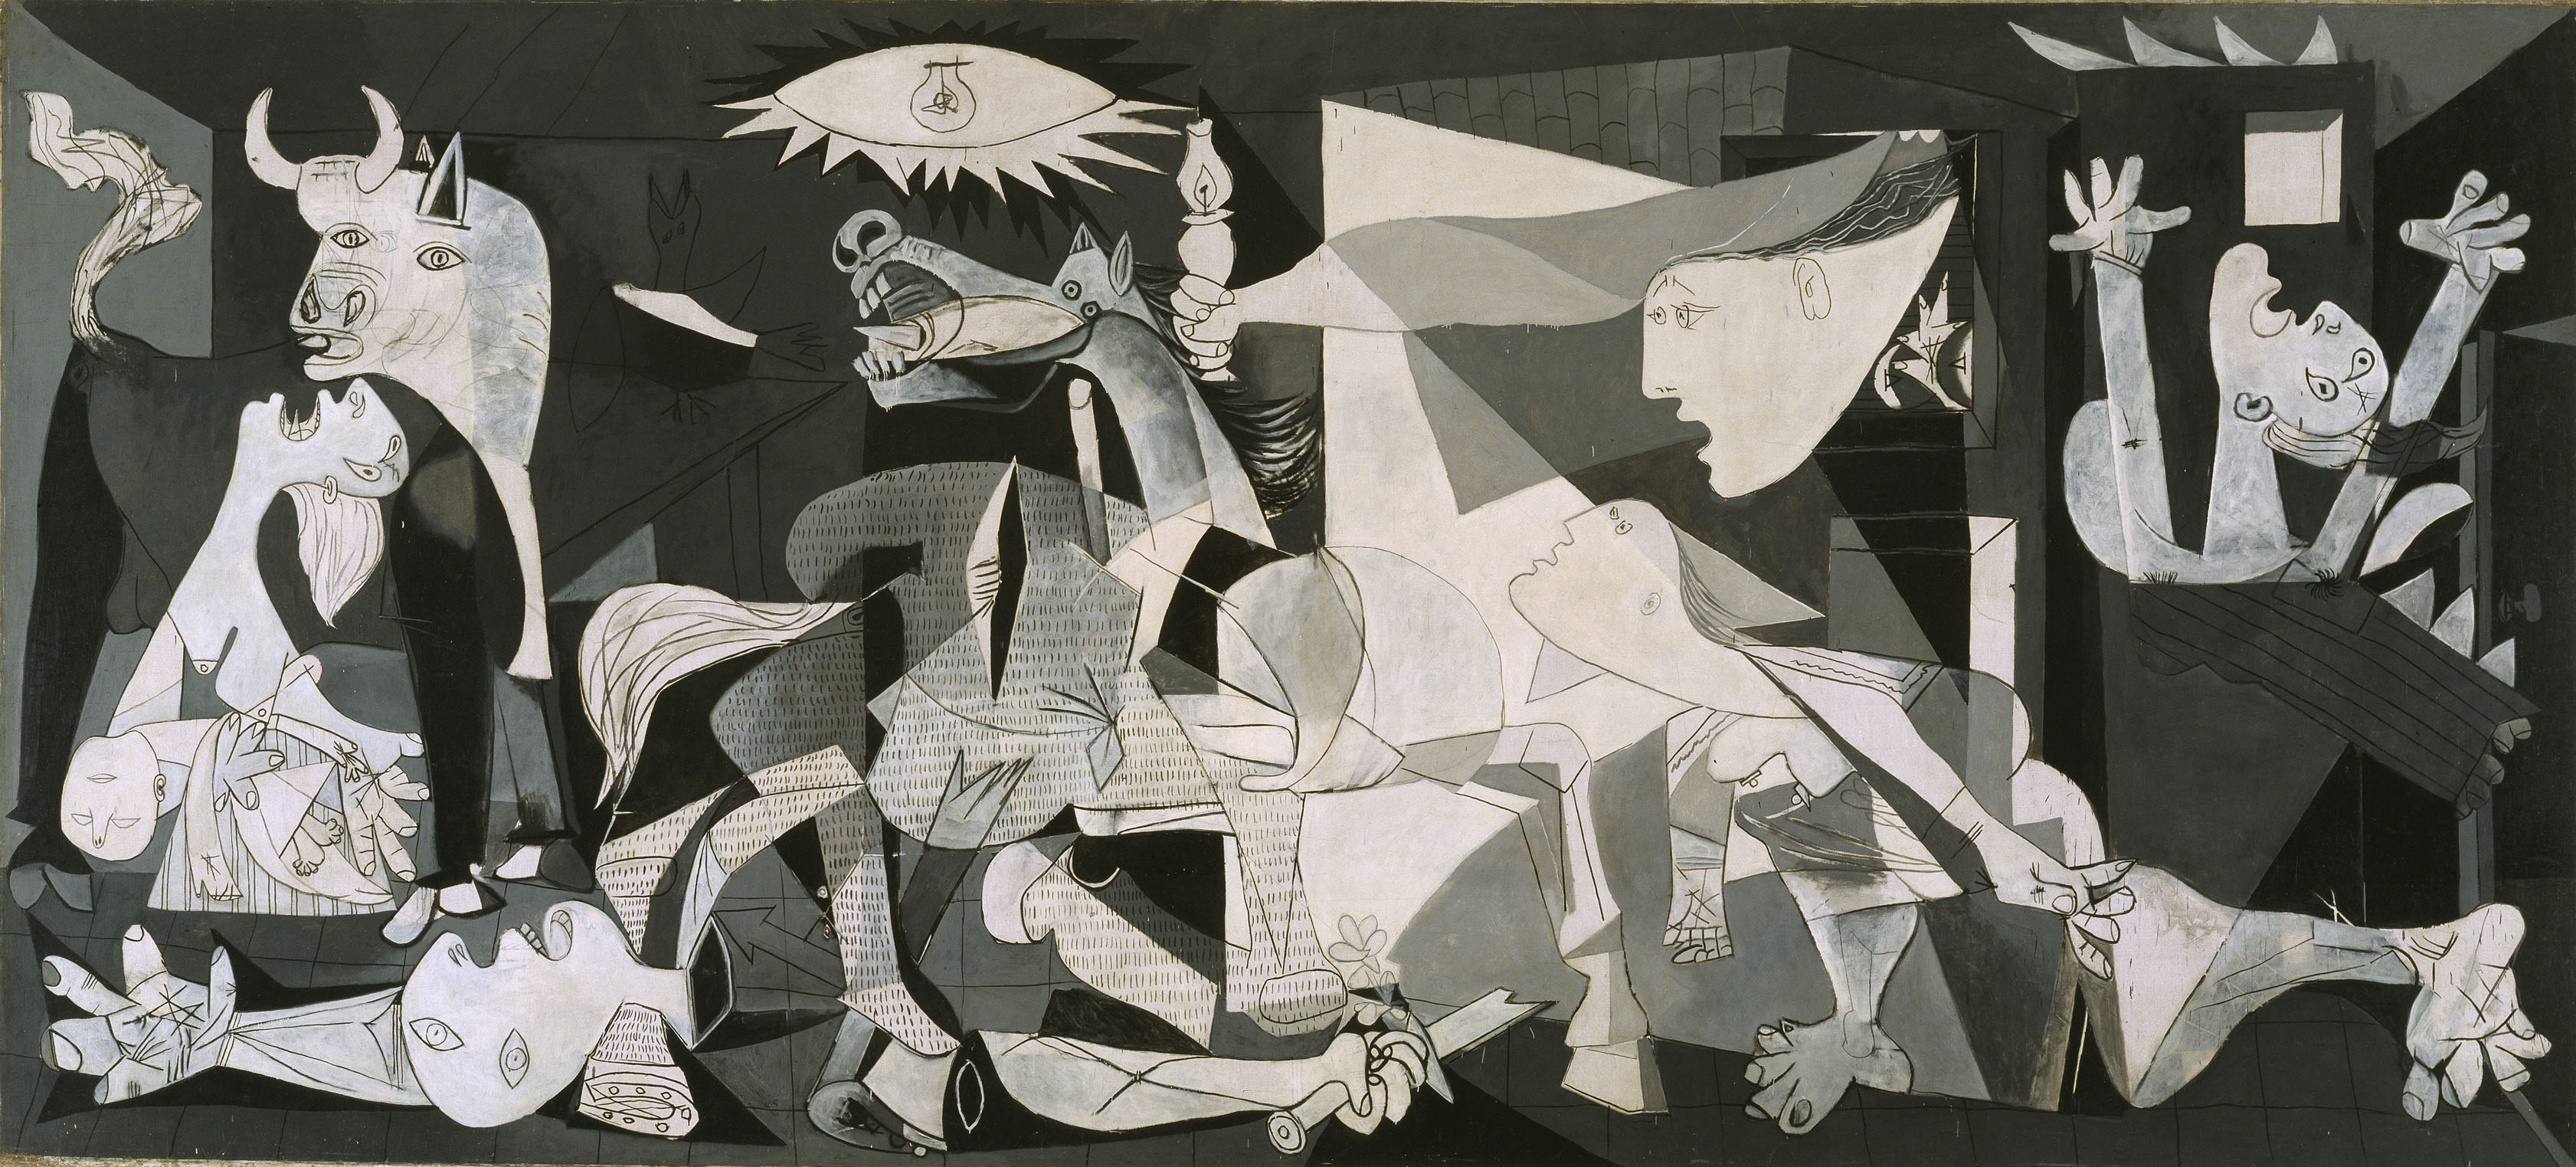 What does Pablo Picasso's masterpiece represent?